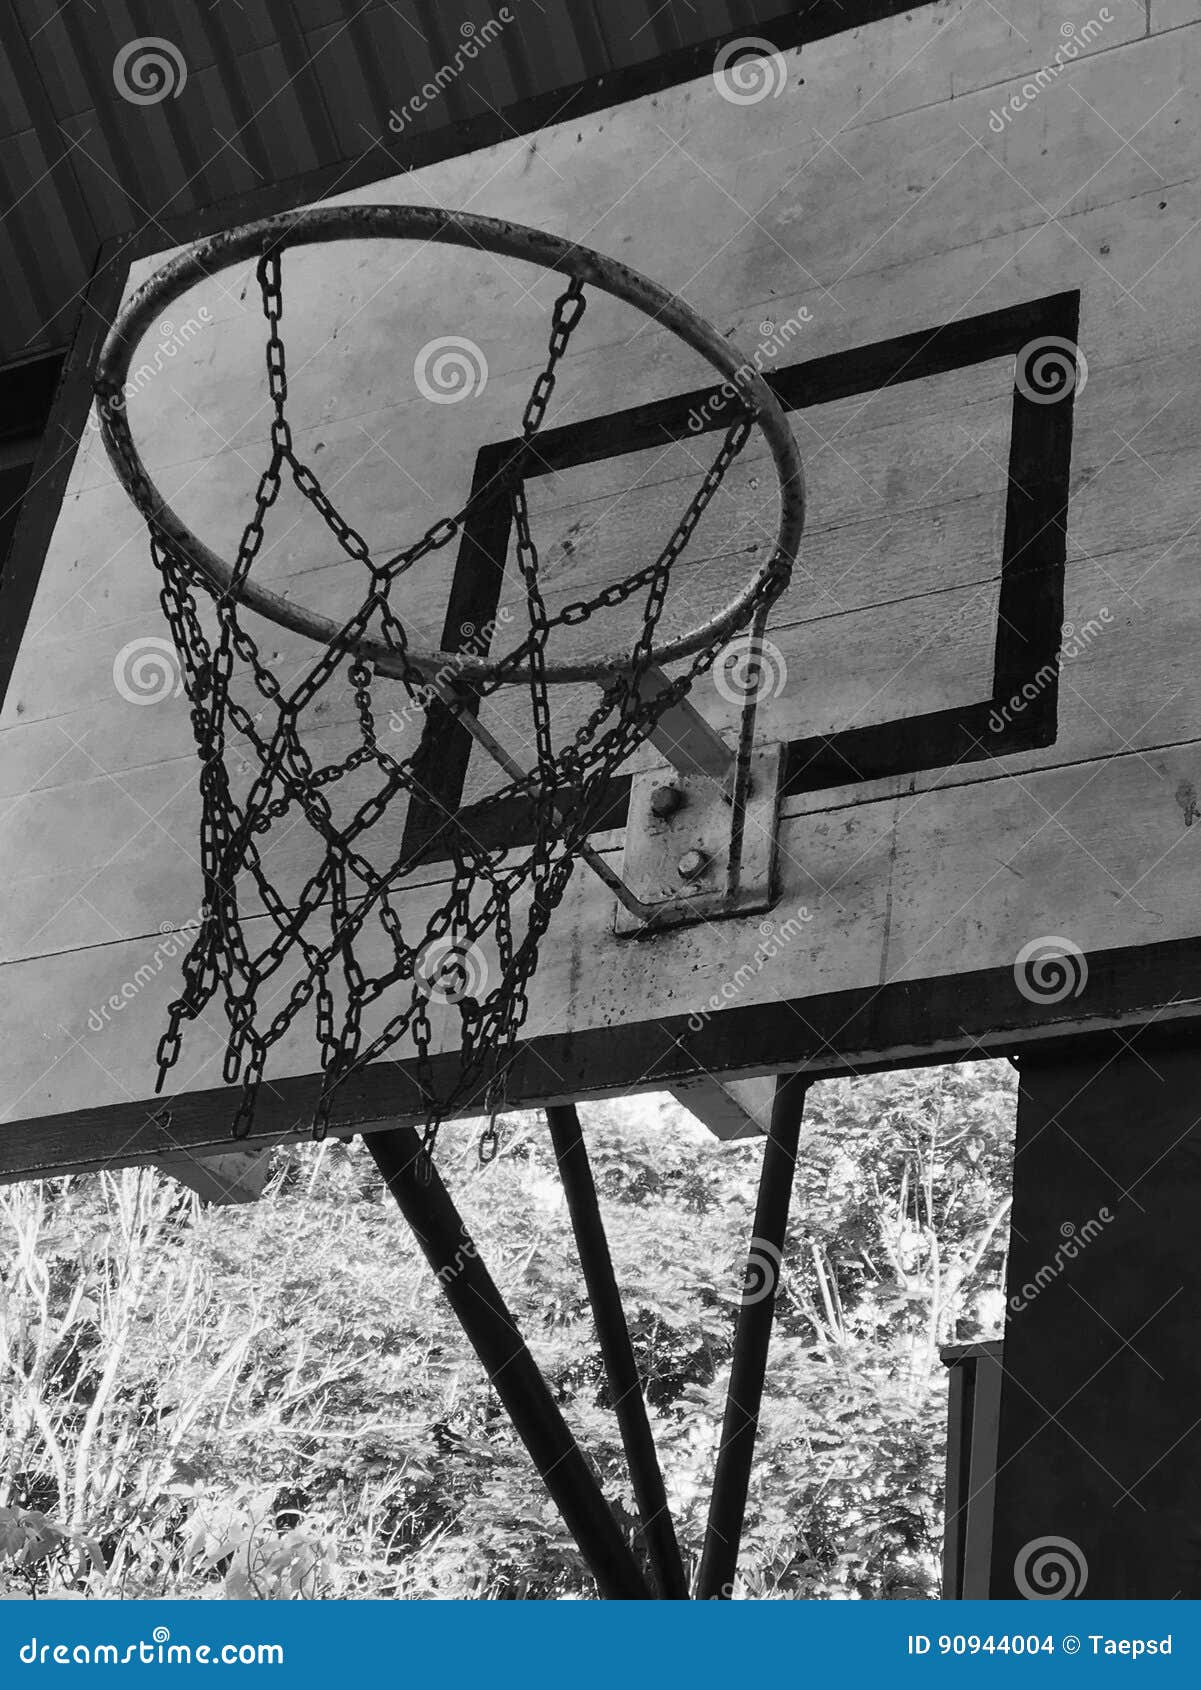 Basketball Hoop in Black and White Stock Photo - Image of court, white ...